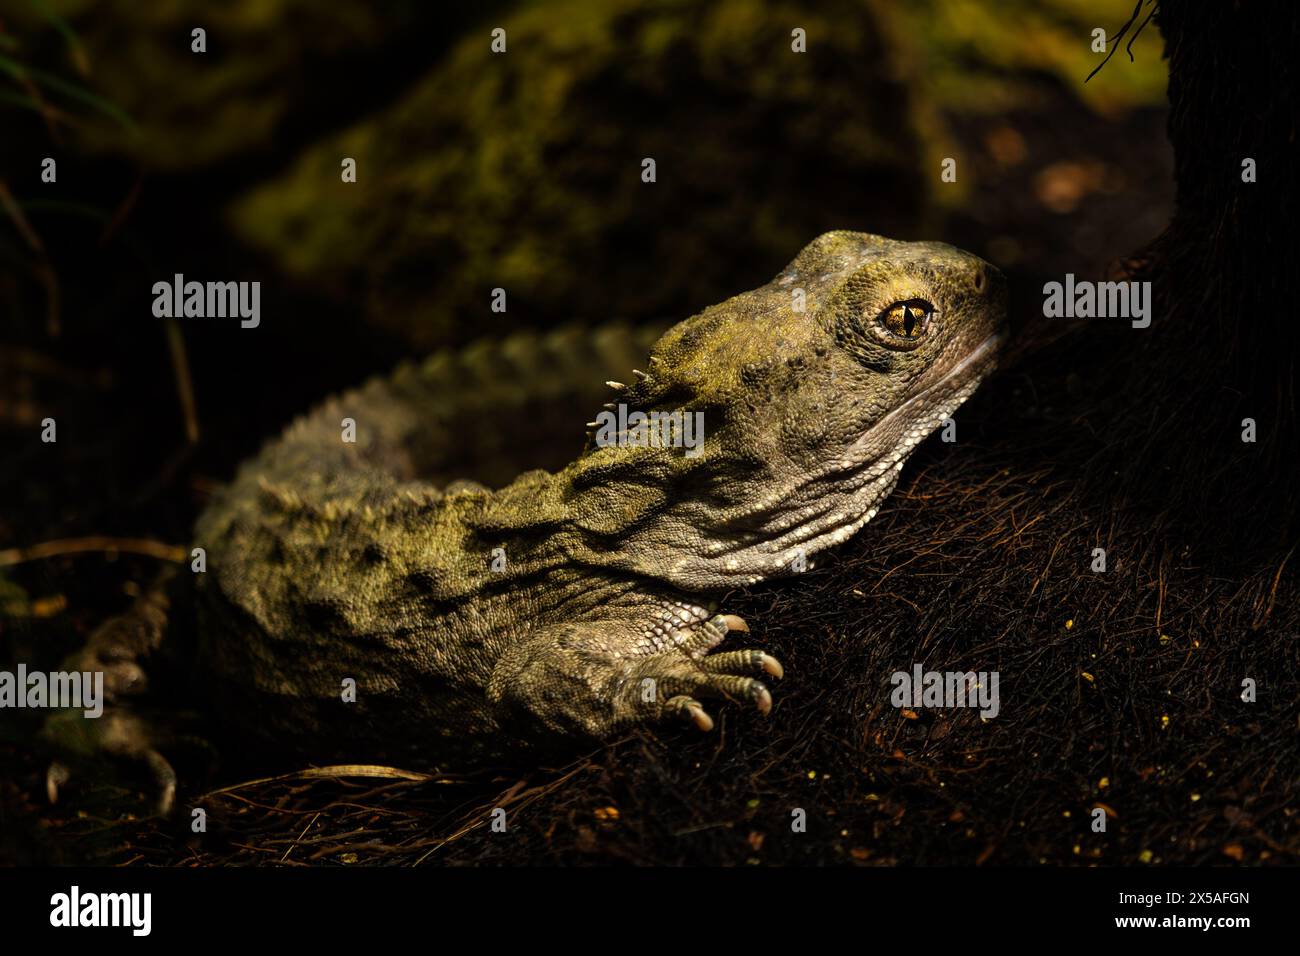 Tuatara - Sphenodon punctatus, unique large reptile called living fossil endemic to forests of New Zealand. Stock Photo